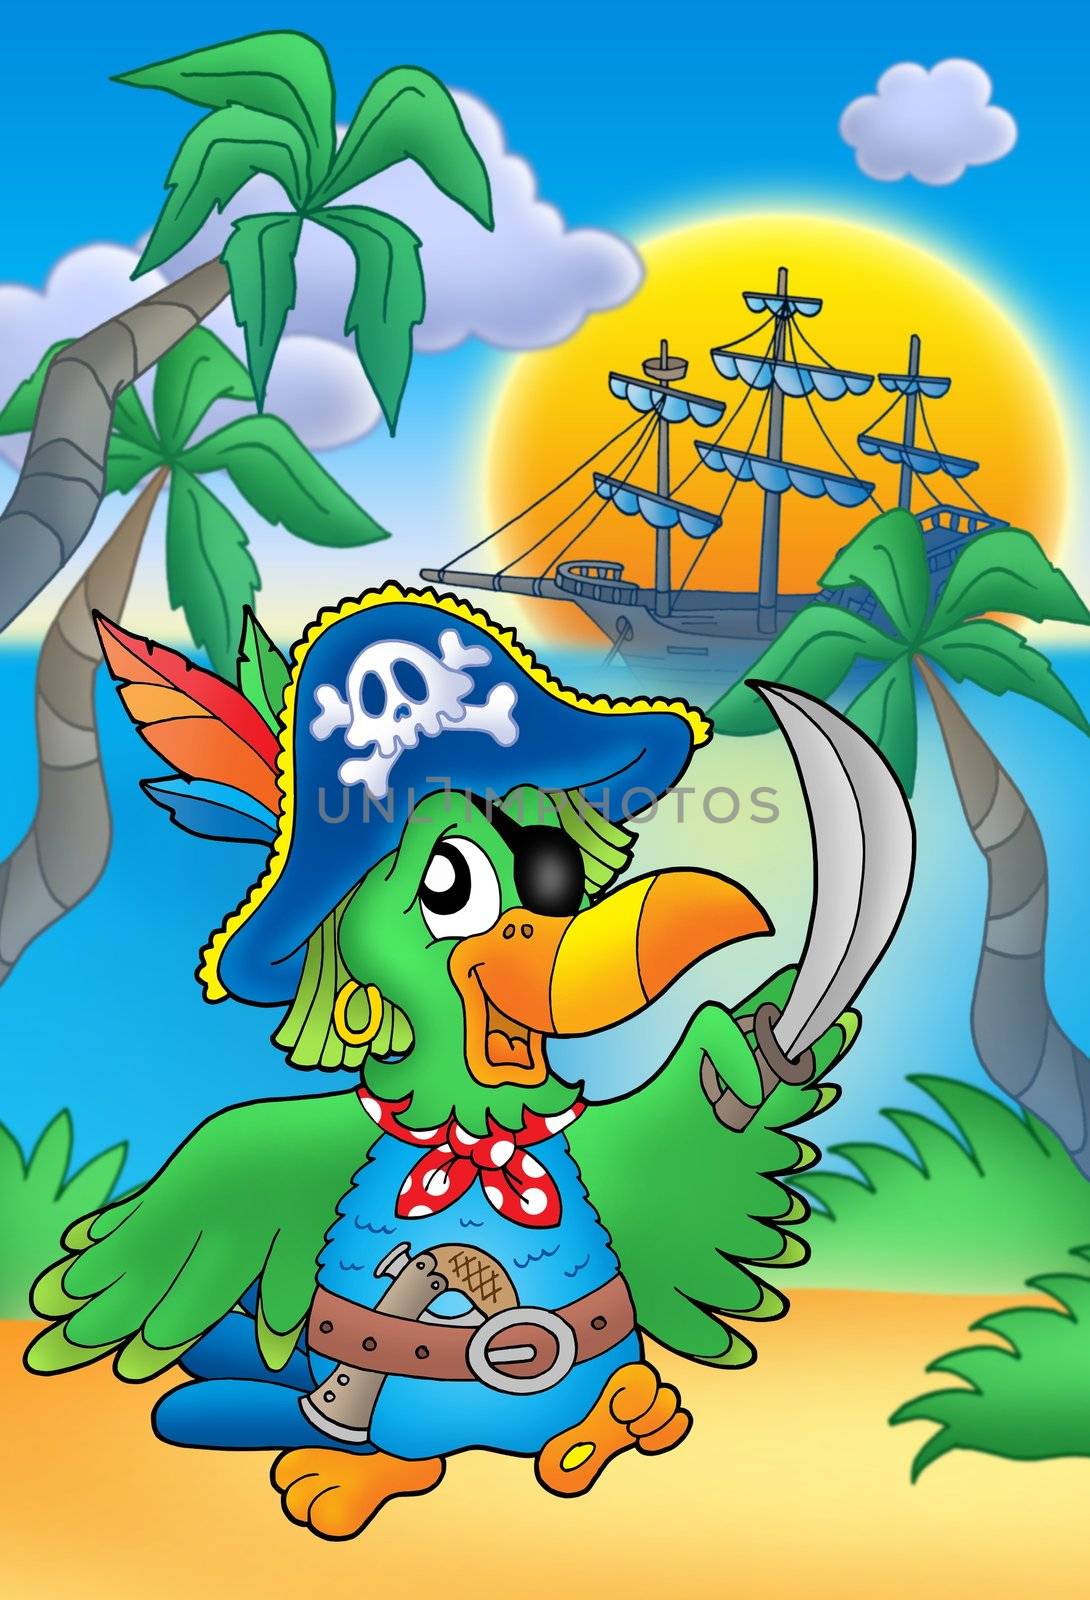 Pirate parrot with boat by clairev